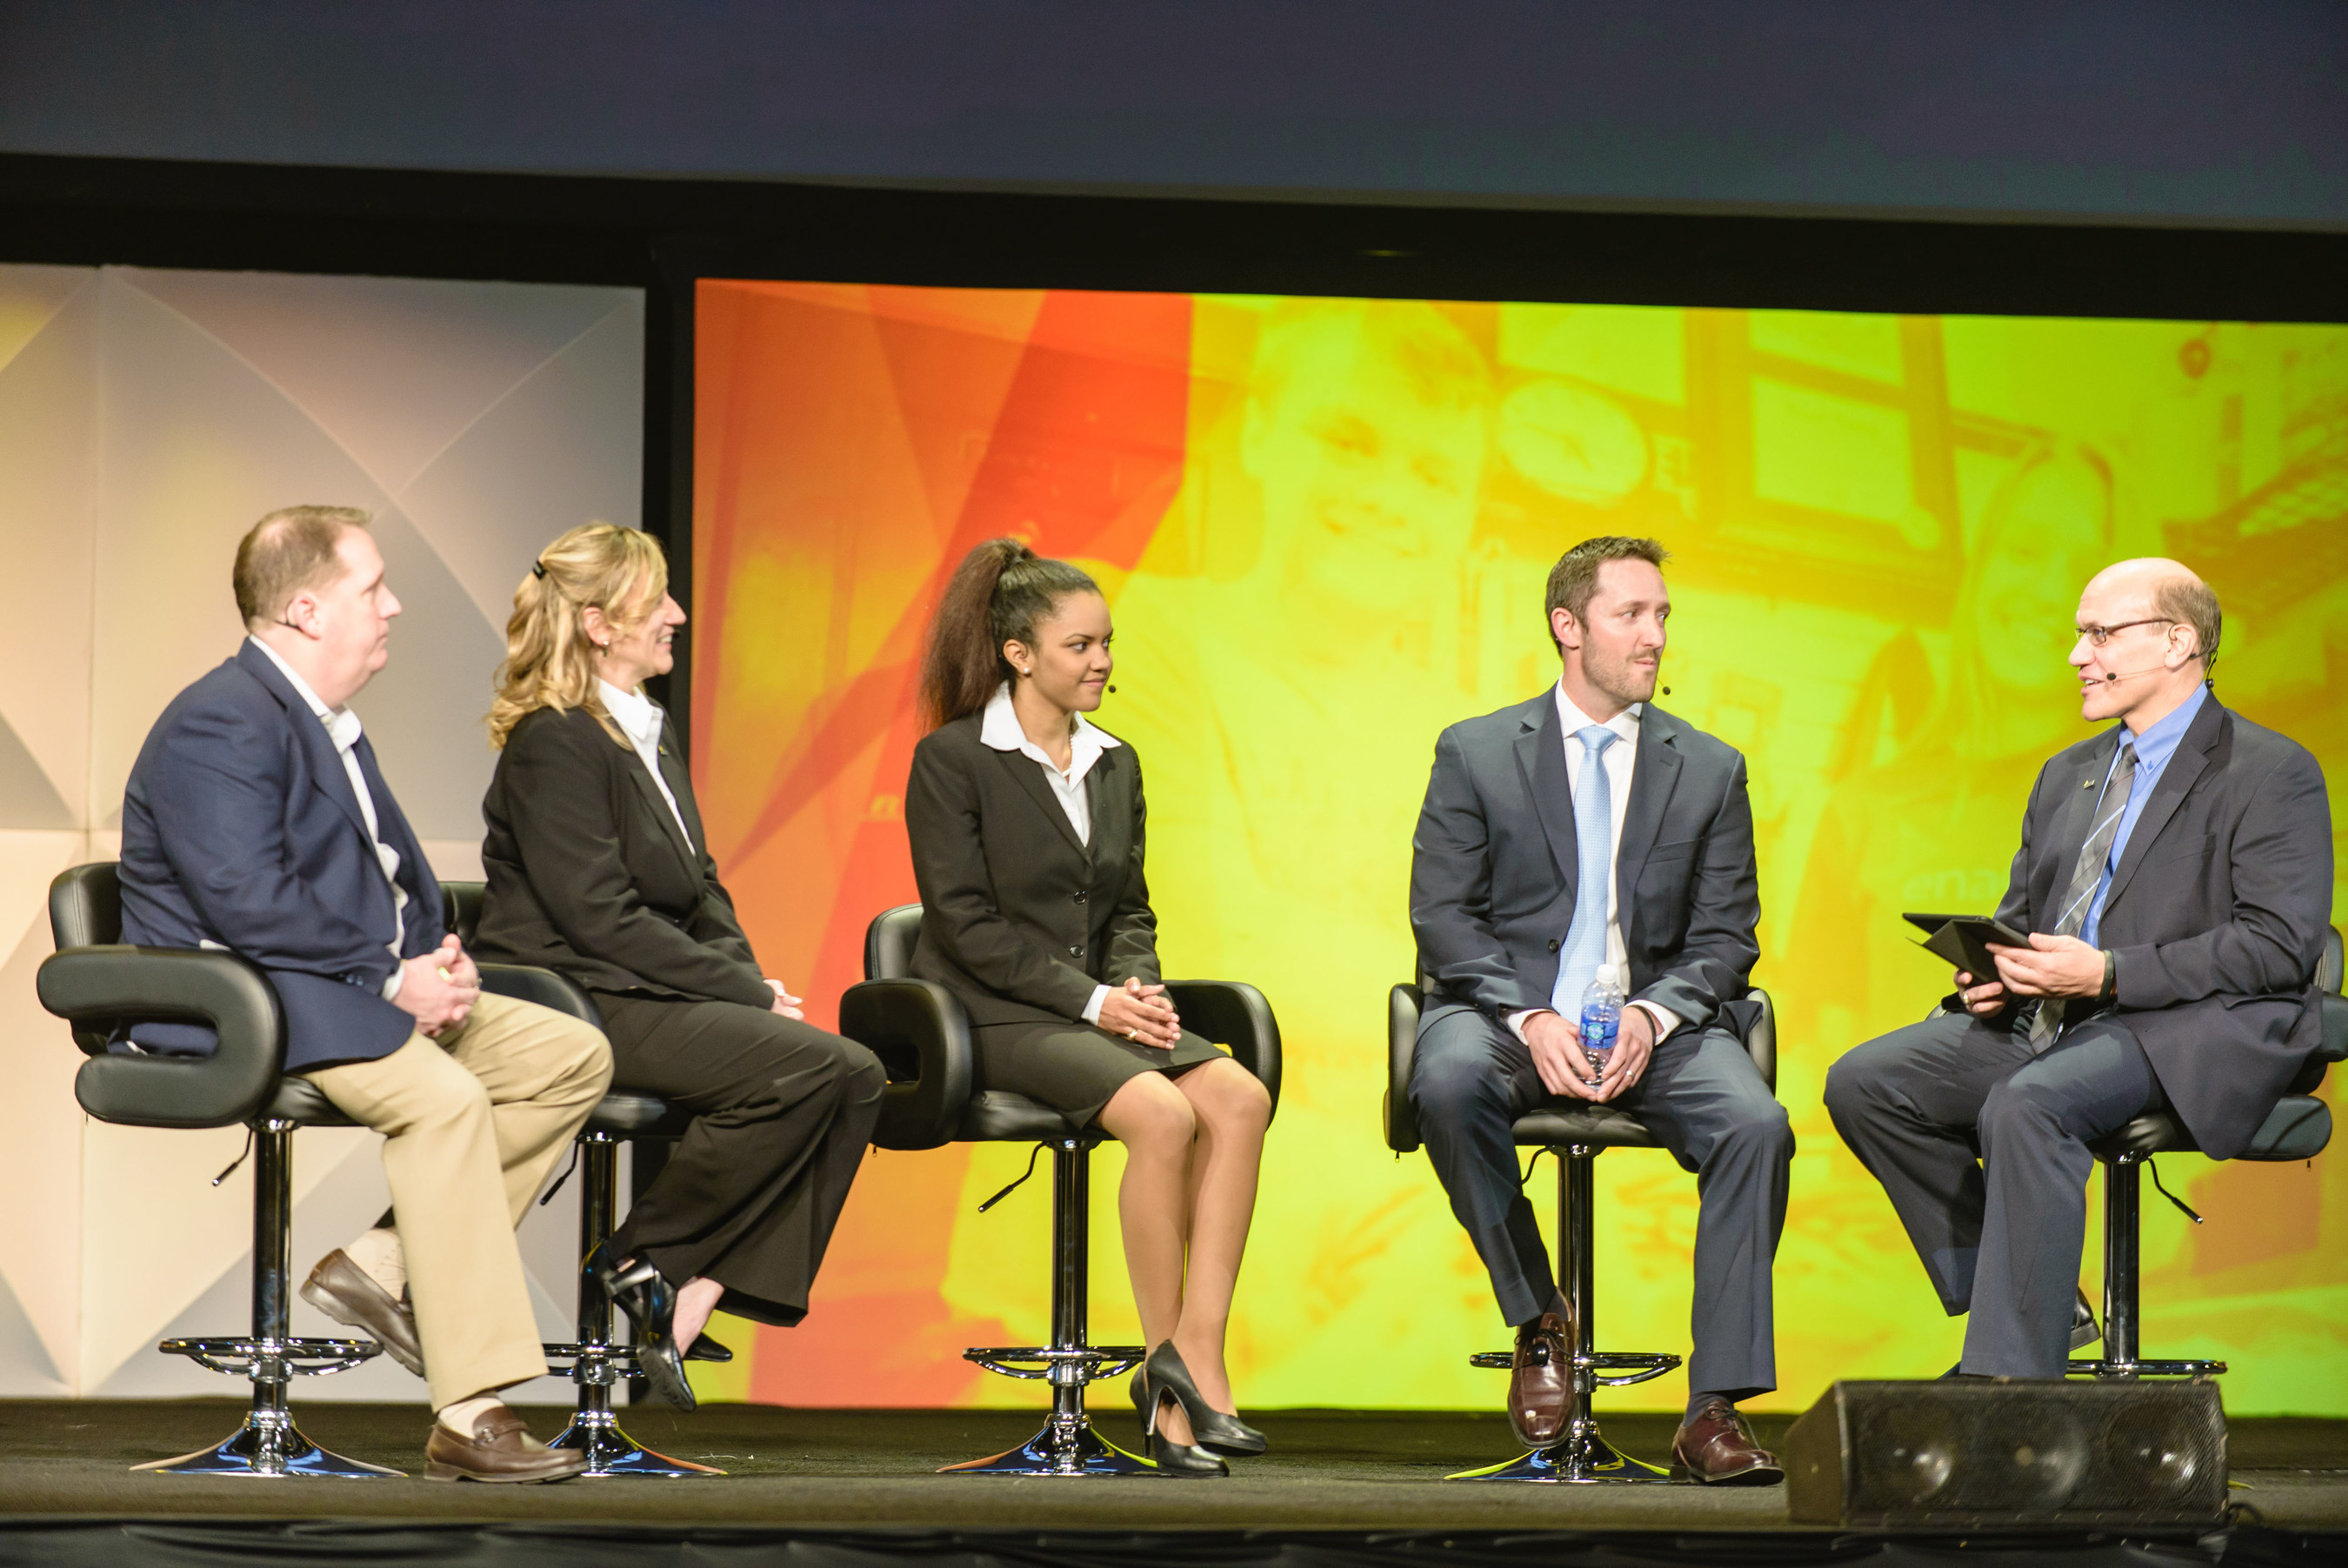 Members discuss opportunities to network and collaborate at the Enactus United States National Exposition Opening Round Ceremony. (L to R) Mike Moore: Chairman, Enactus United States National Advisory Board, EVP and President of Small Formats for Walmart US, Walmart Stores, Inc.; Cynthia Wood; Chelsea Watkins; Tim Clow; Alex Perwich: President, Enactus United States